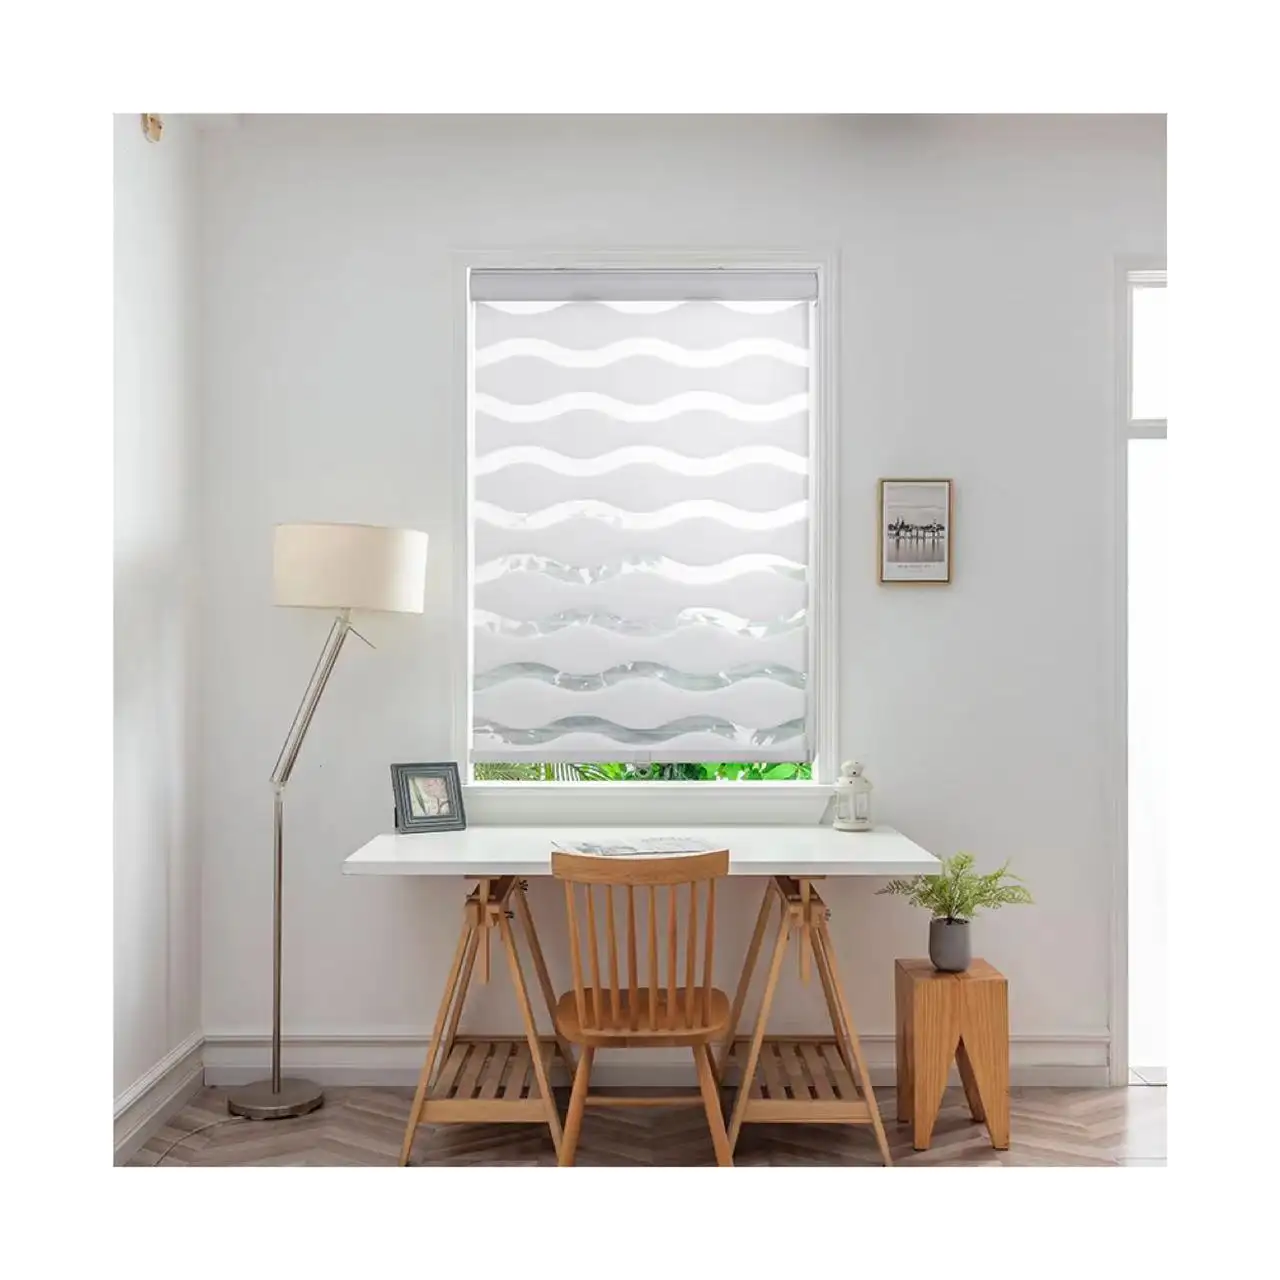 Cordless Zebra Blinds Light Filtering Sheer Shades Dual Outdoor Roller Blinds Control Zebra Blind for Day and Night